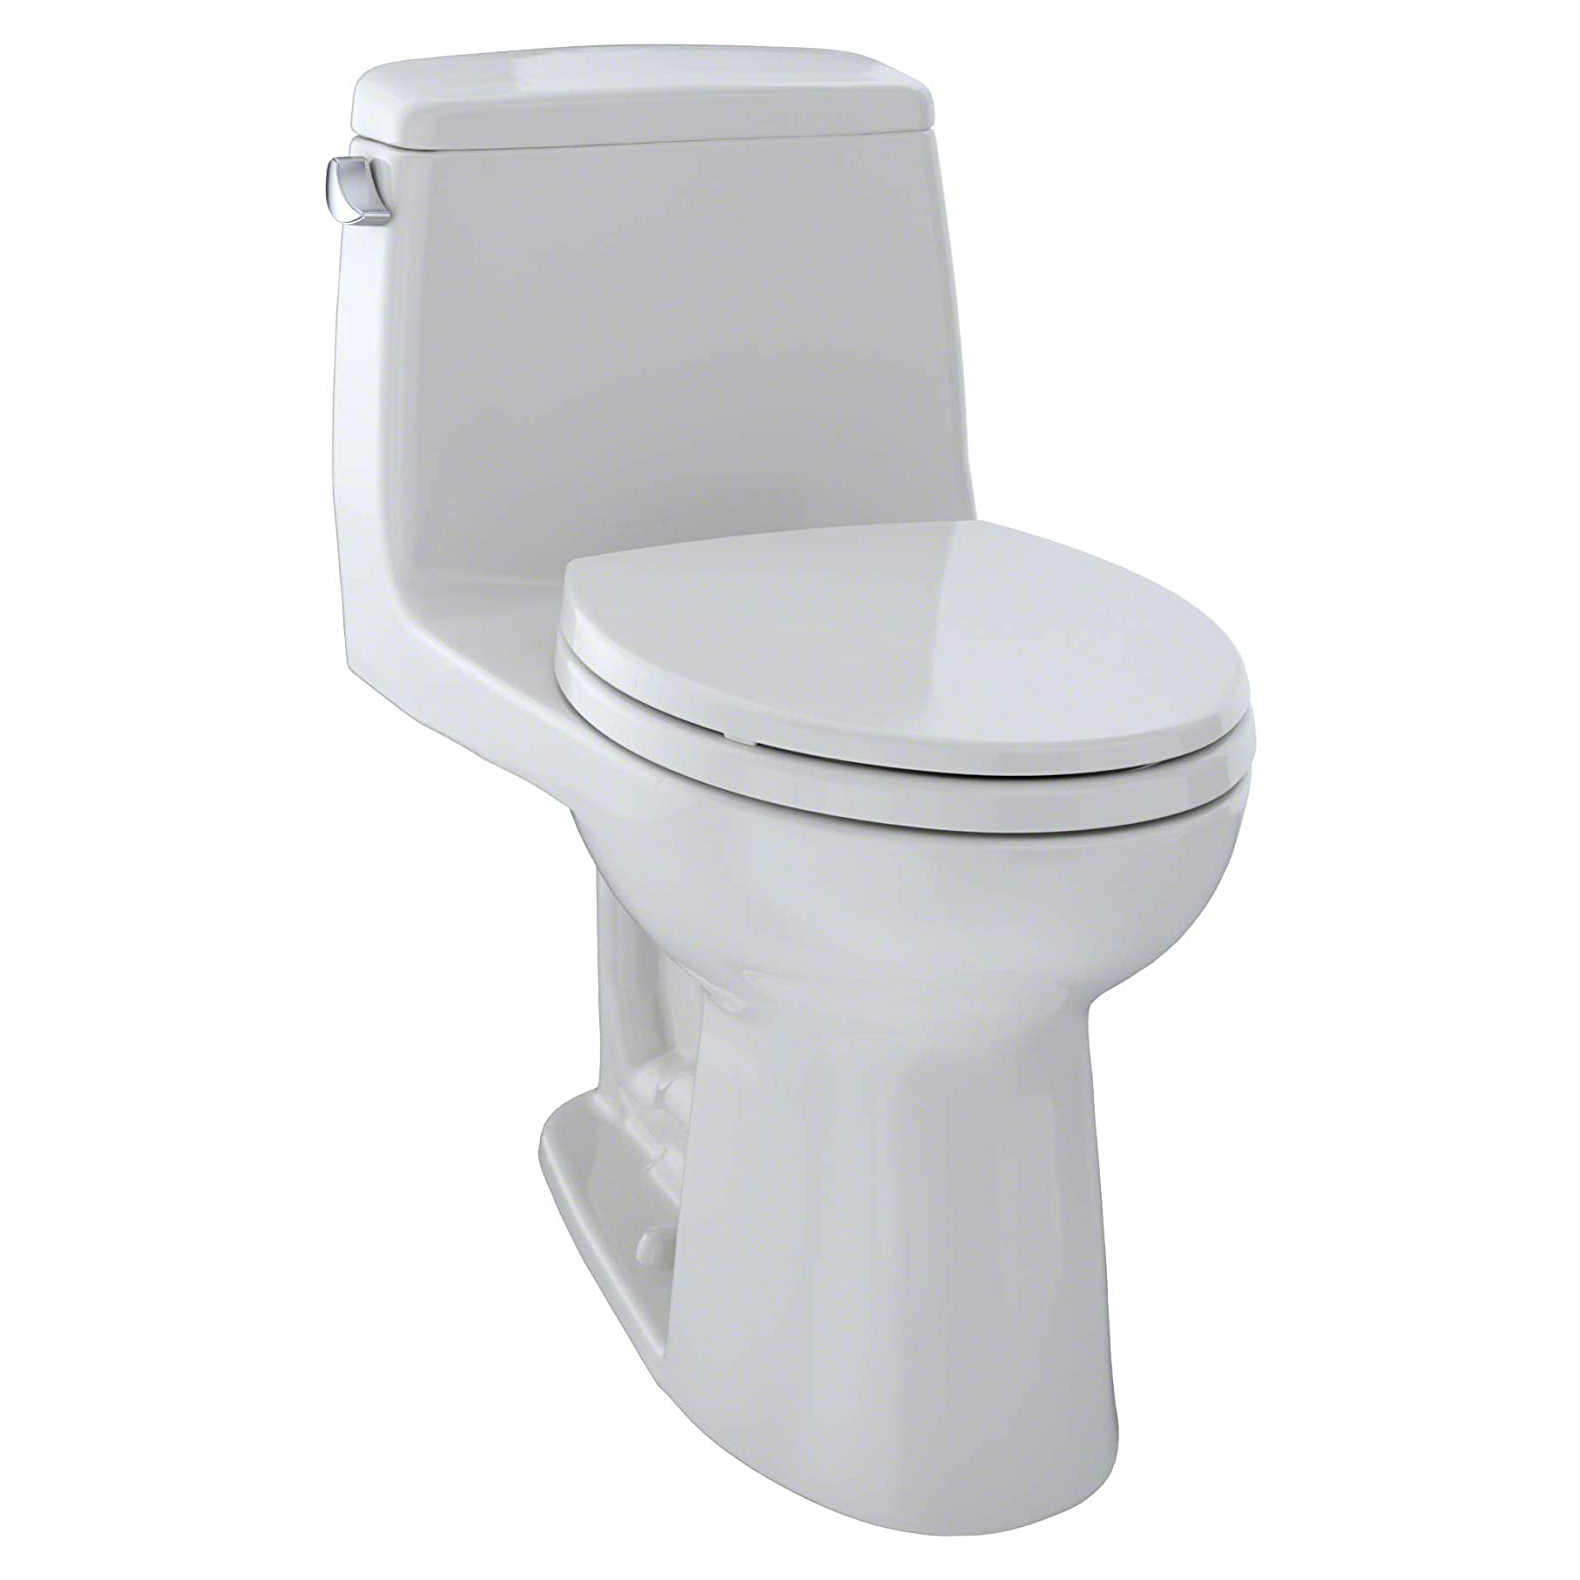 Ultramax 1-pc Elongated Toilet w/Seat in Colonial White 1.6 gpf